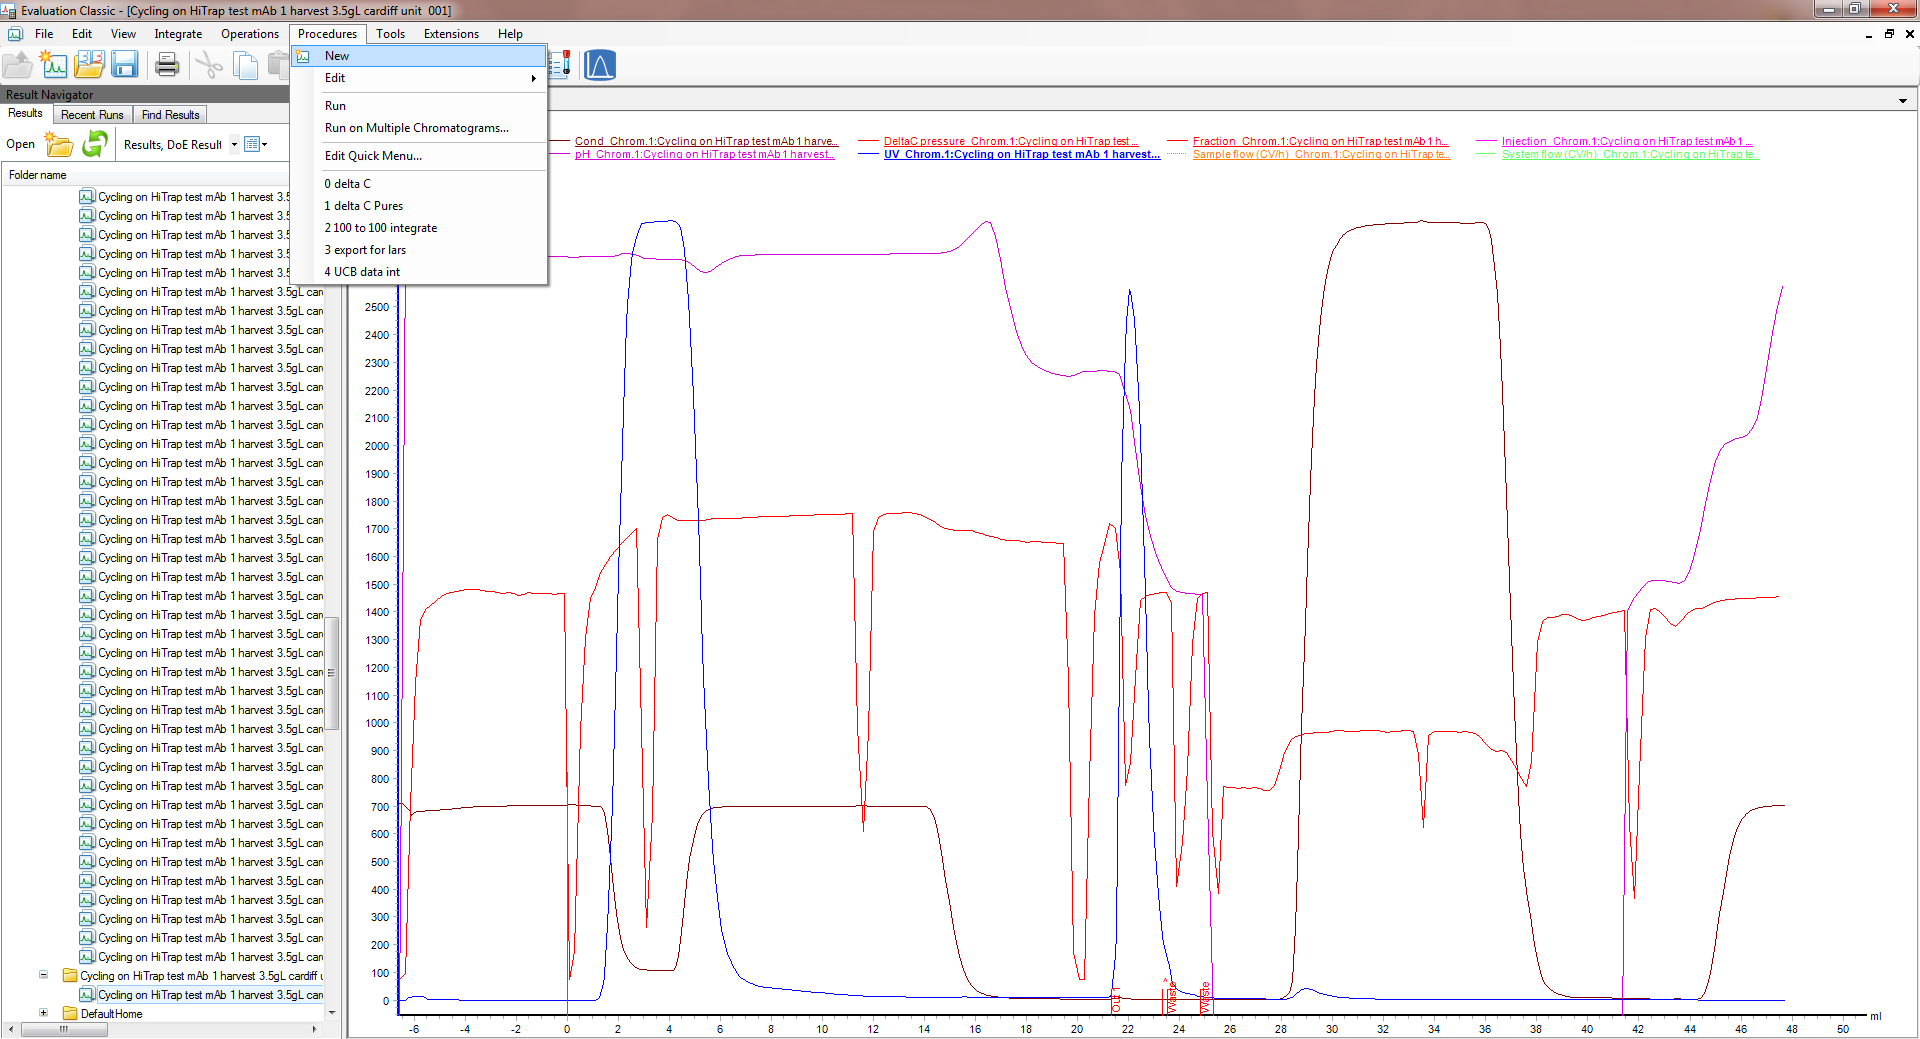 Creating a new UNICORN Evaluation Classic procedure to compare chromatography results